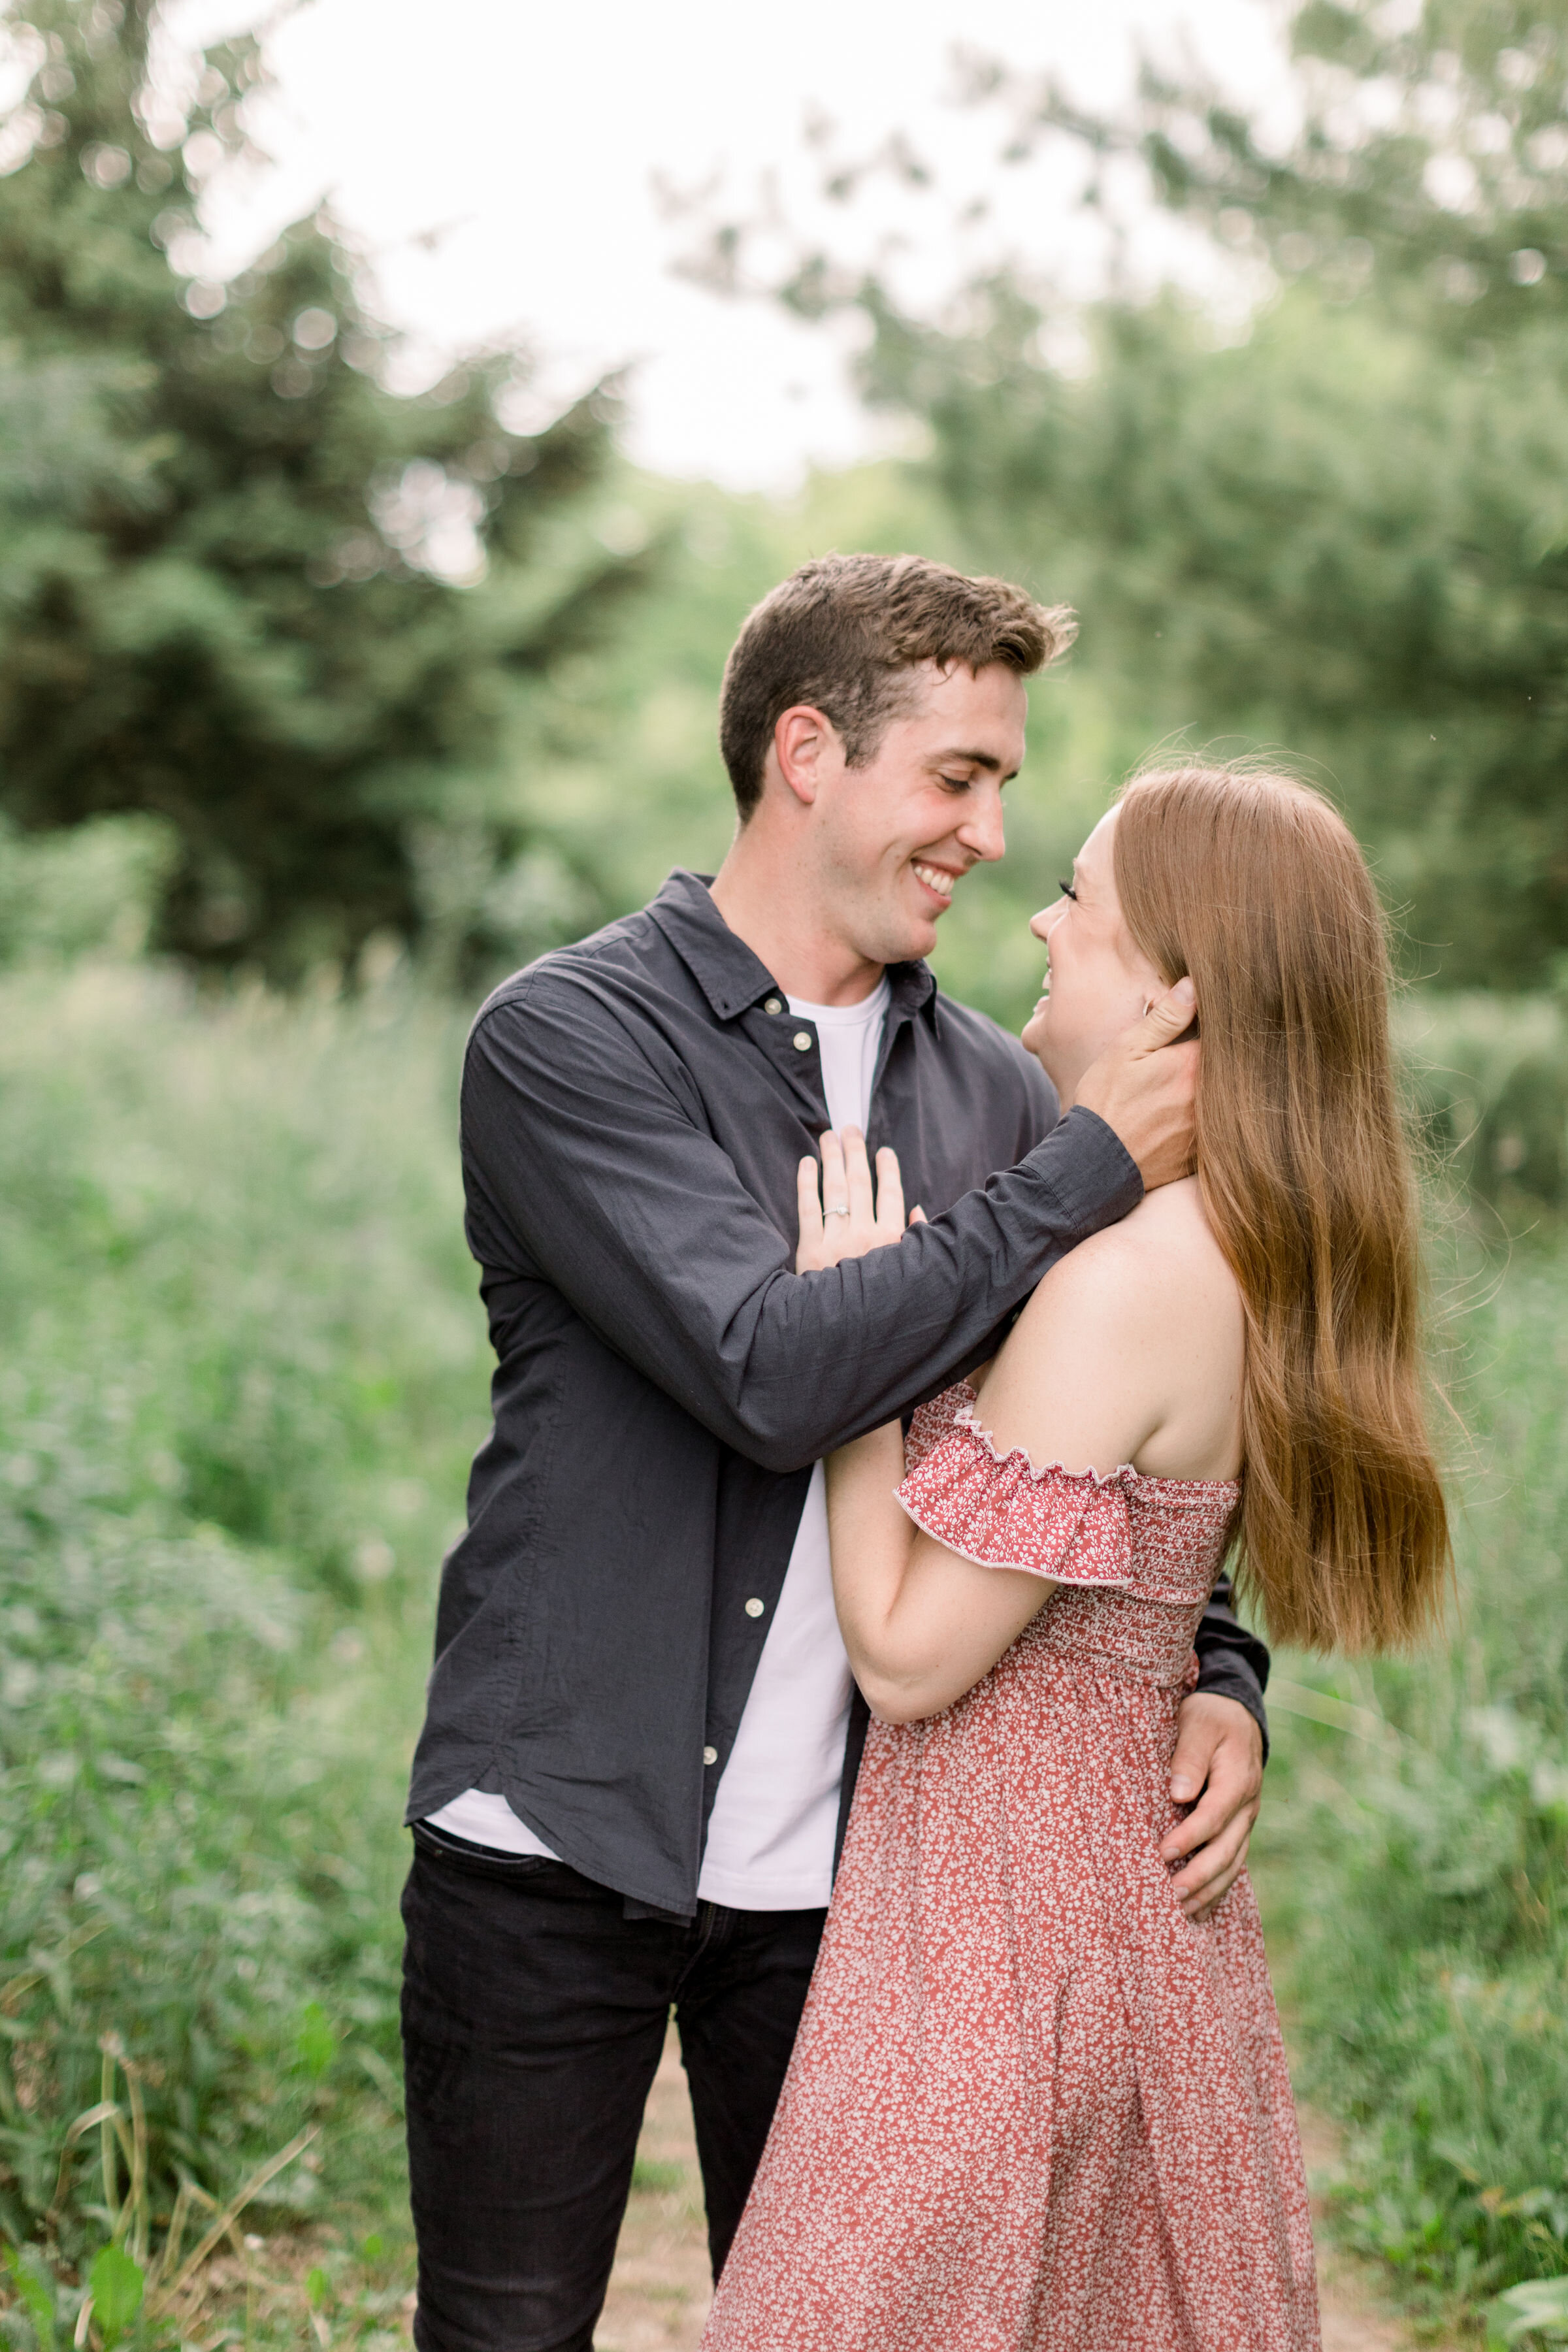  In a wooded clearing in Arboretum, Ottawa, Chelsea Mason Photography captures this engaged couple lovingly holding one another. groom cupping fiancé's face smiling couple wooded engagement session arboretum Ottawa photographer #ChelseaMasonPhotograp